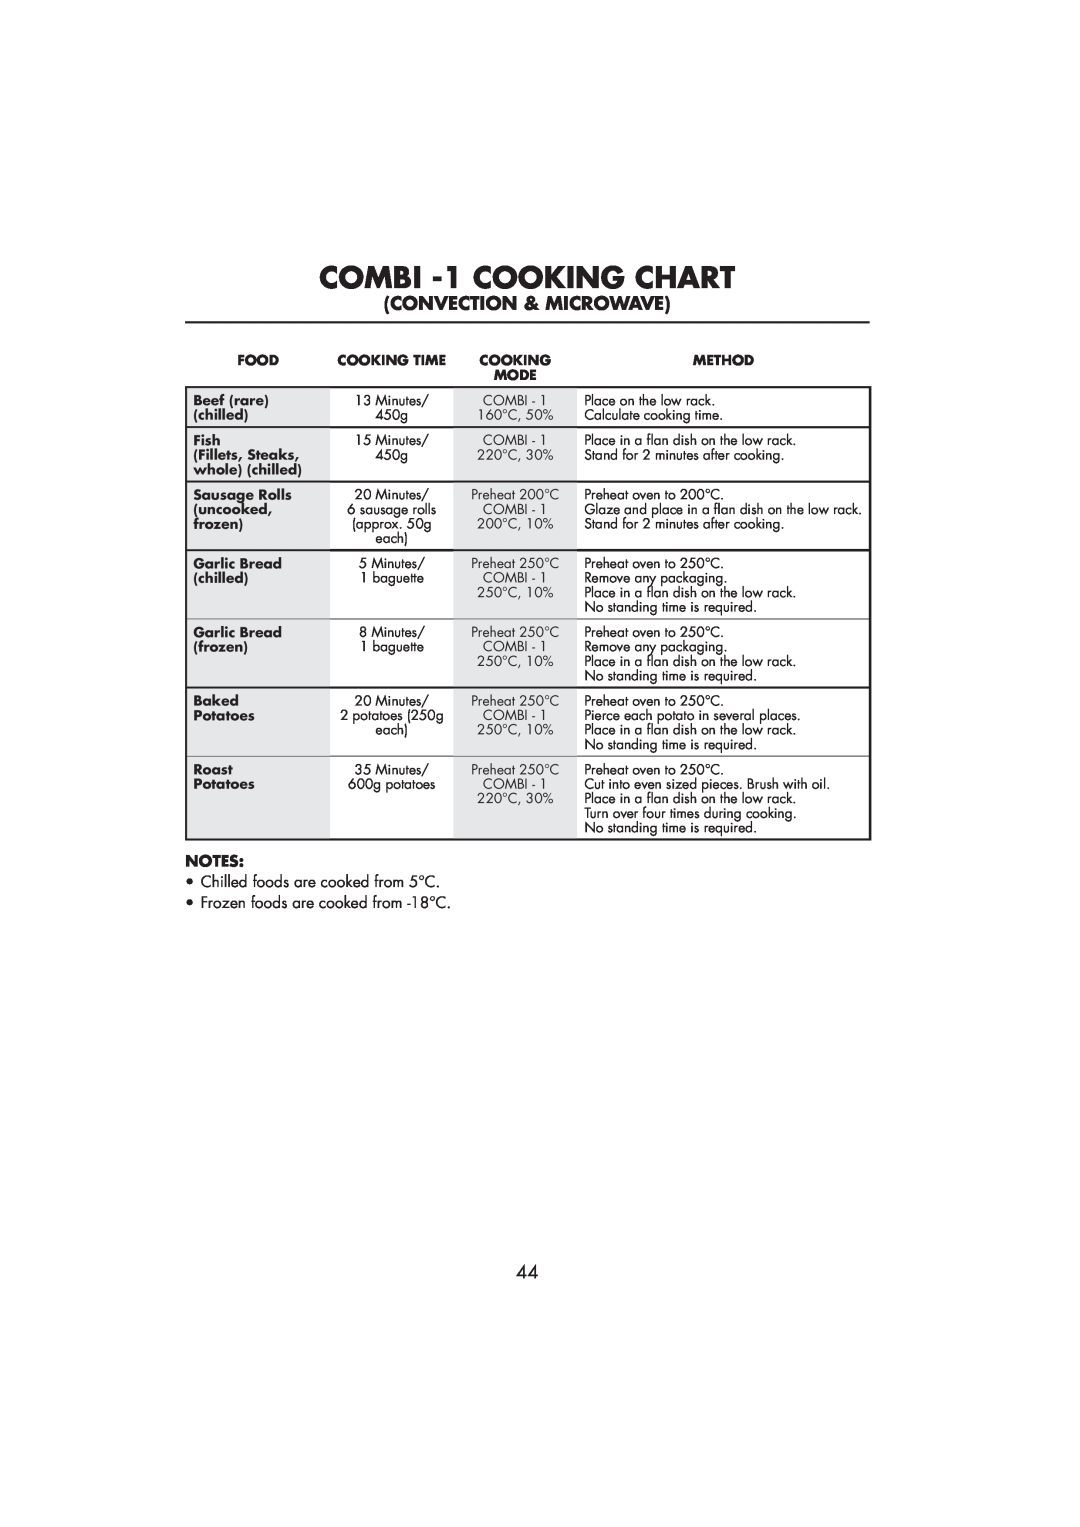 Sharp R-890SLM operation manual COMBI -1 COOKING CHART, Convection & Microwave 